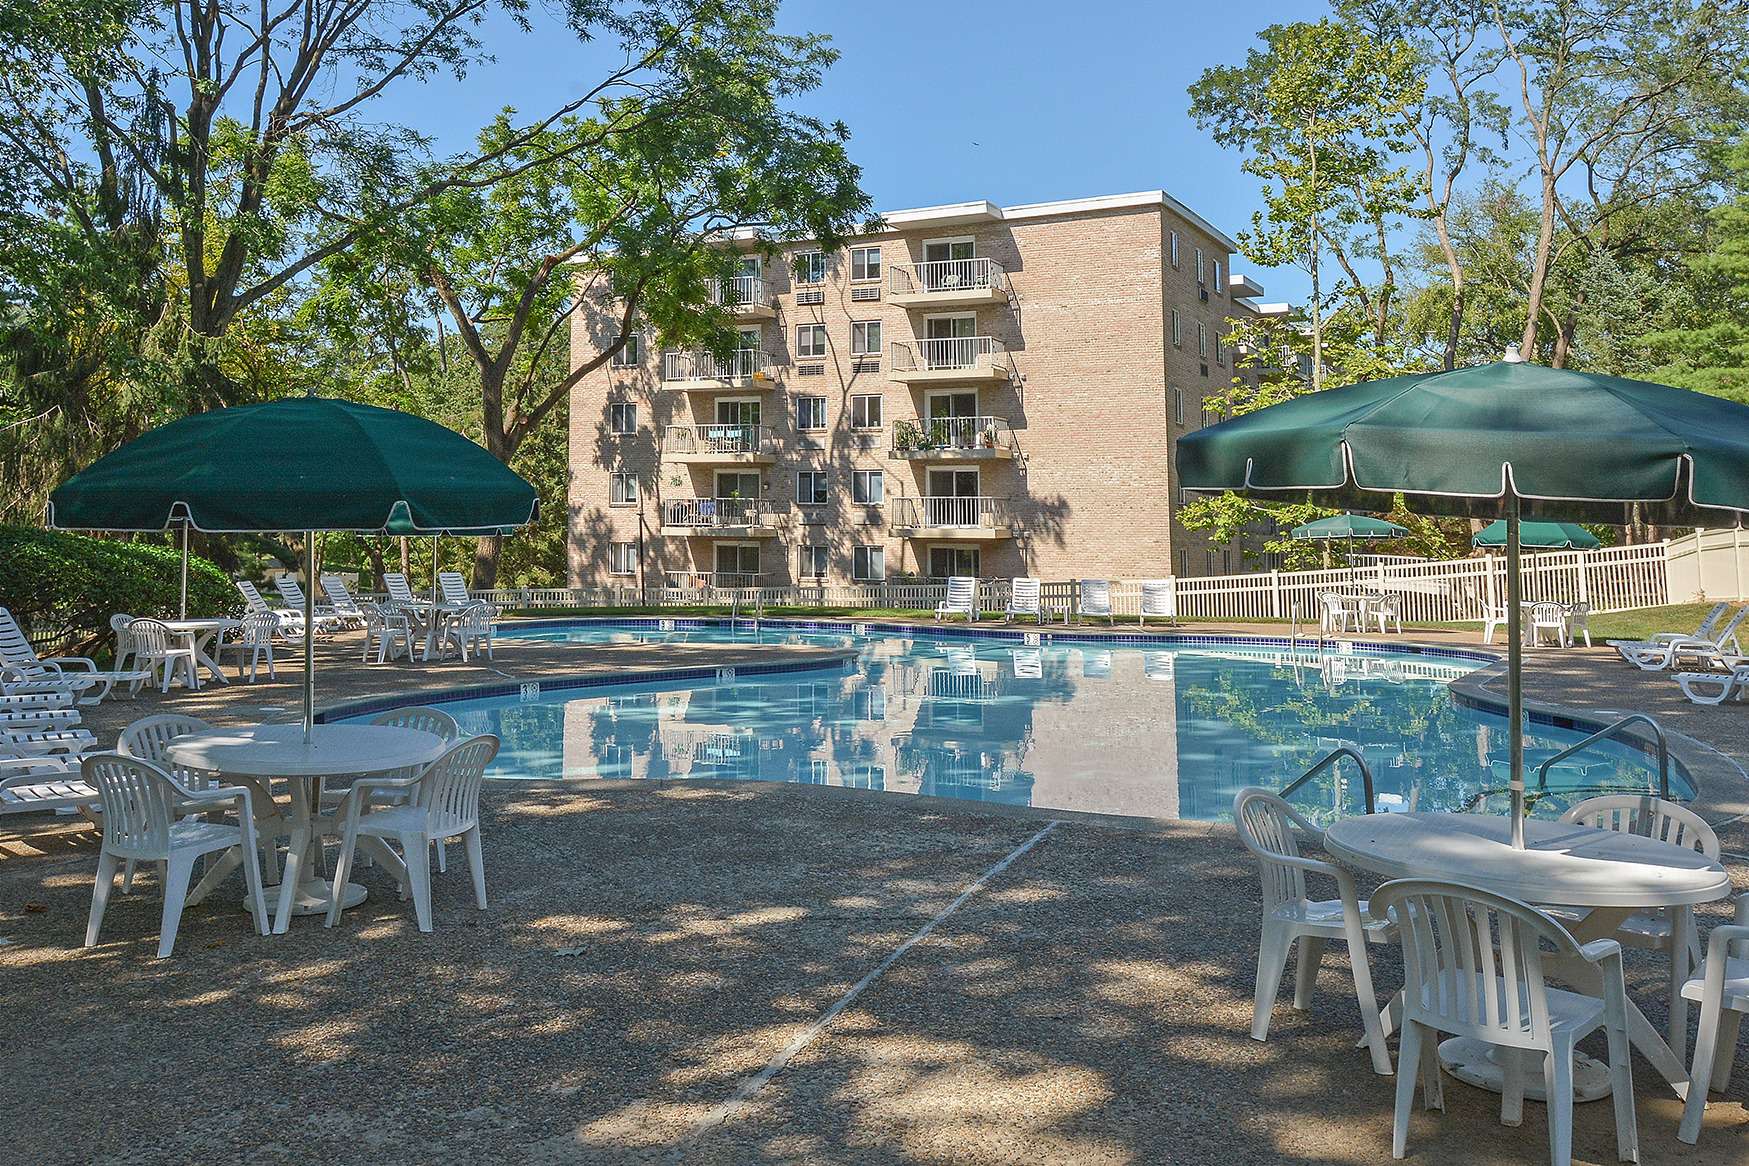 Outdoor pool area with a variety of seating options surrounded by trees and apartment buildings.